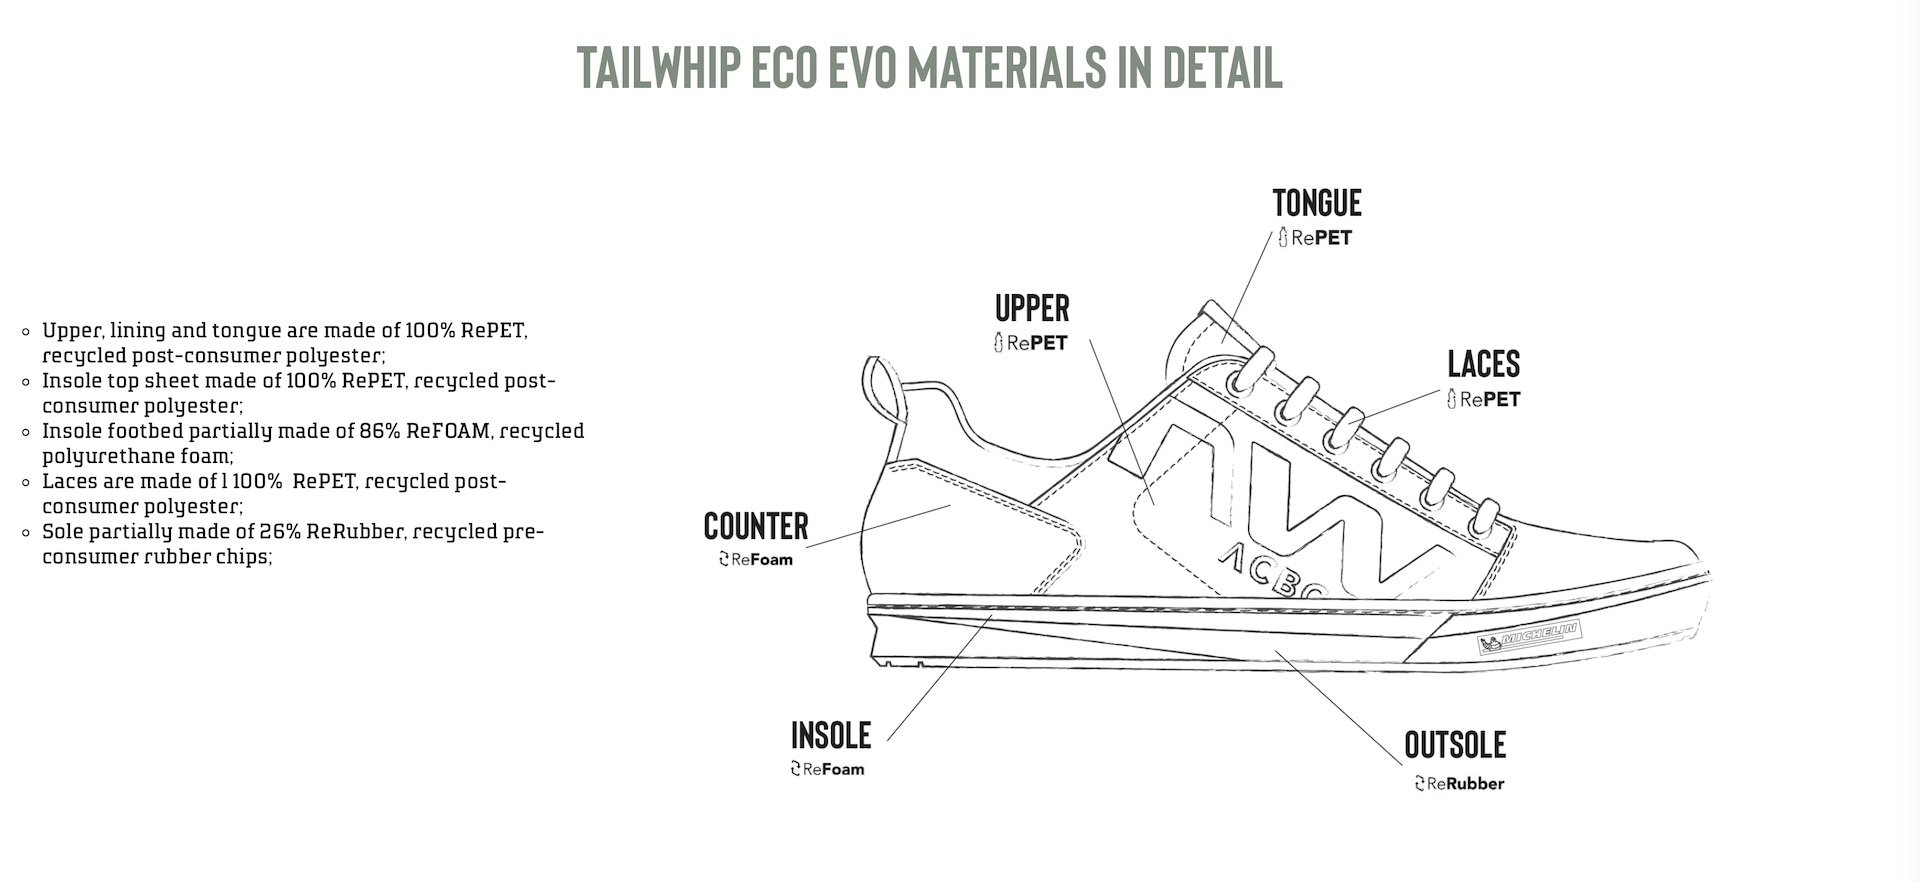 North wave tailwhip eco evo flat pedal shoes materials details